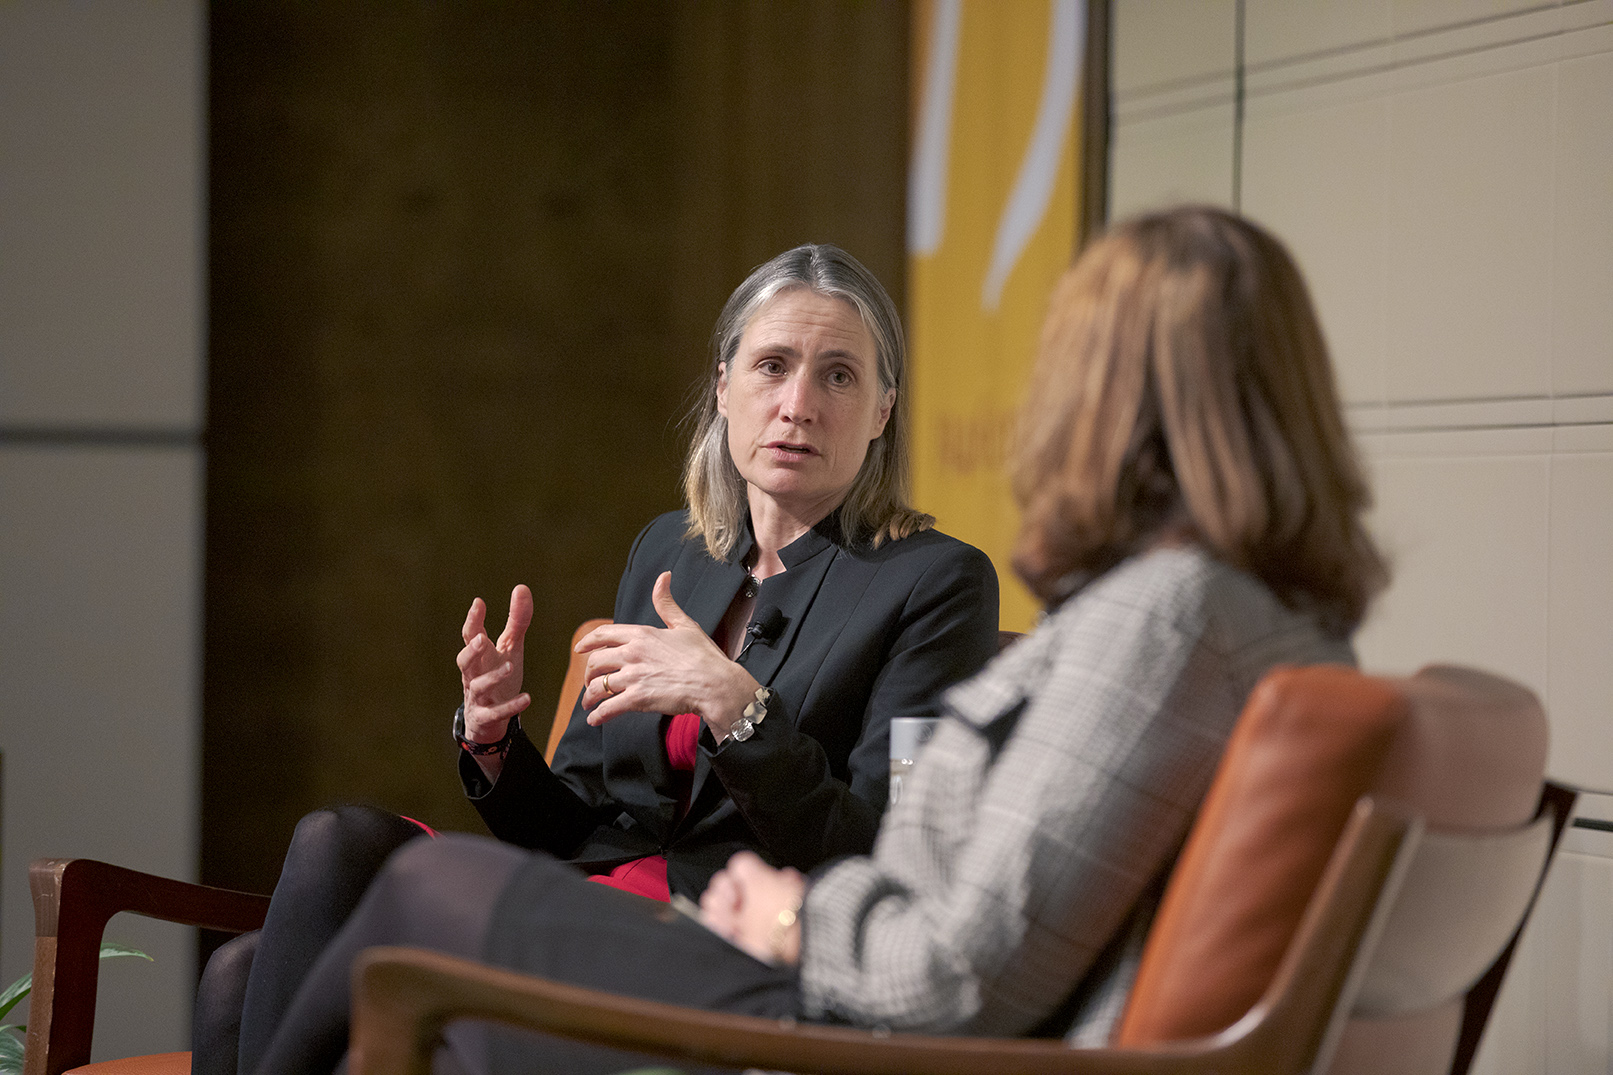 Dr. Fiona Hill and Hilary Appel, Ph.D. Podlich Family Professor of Government and George R. Roberts Fellow, have a discussion as part of the 75th Anniversary Distinguished Speaker Series at the Athenaeum on Wednesday, March 9, 2022.